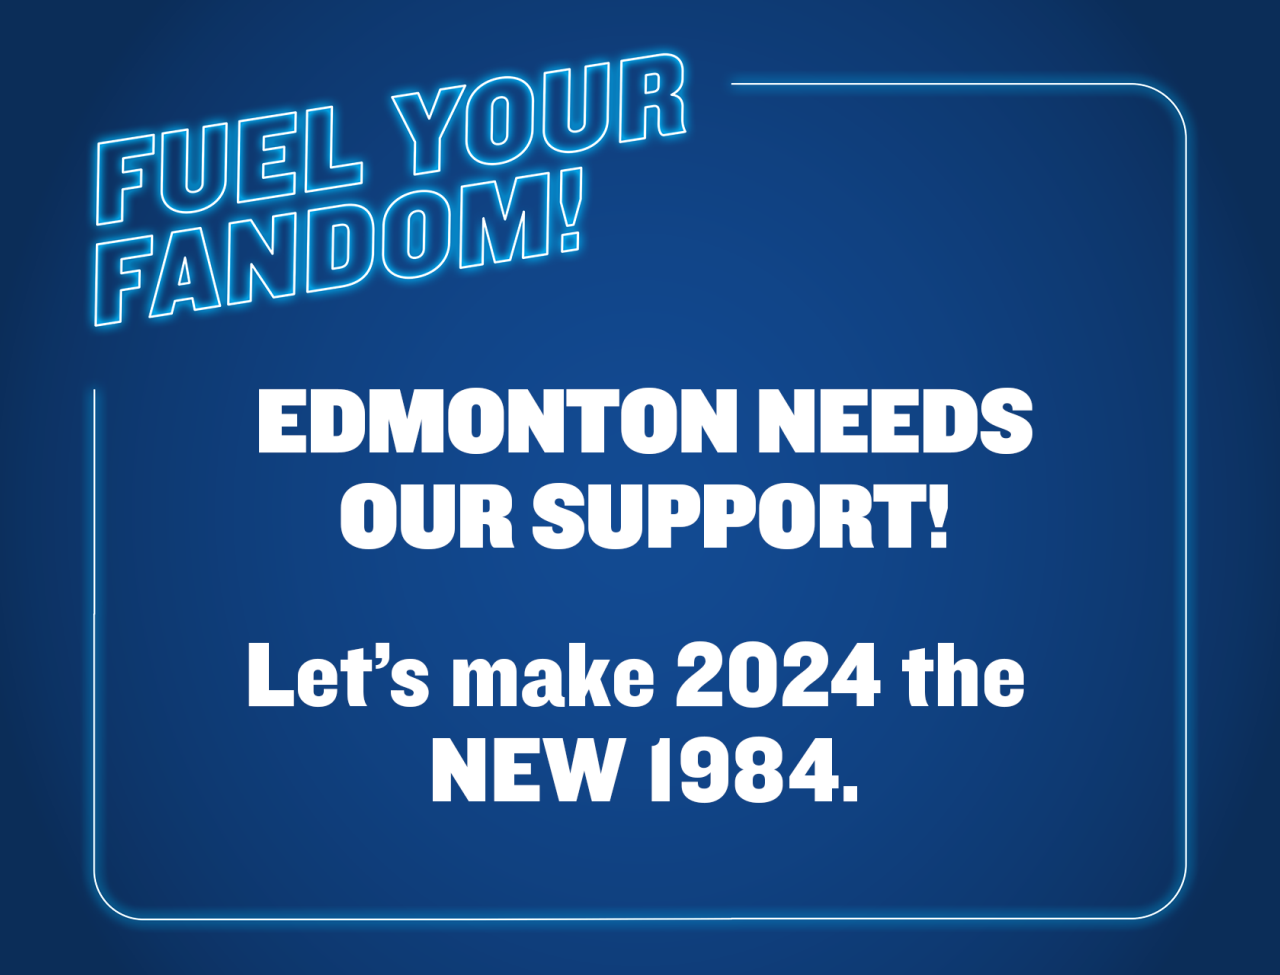 EDMONTON AND VANCOUVER ADVANCE TO ROUND 2! We won’t stop cheering until Canada’s teams stop winning.